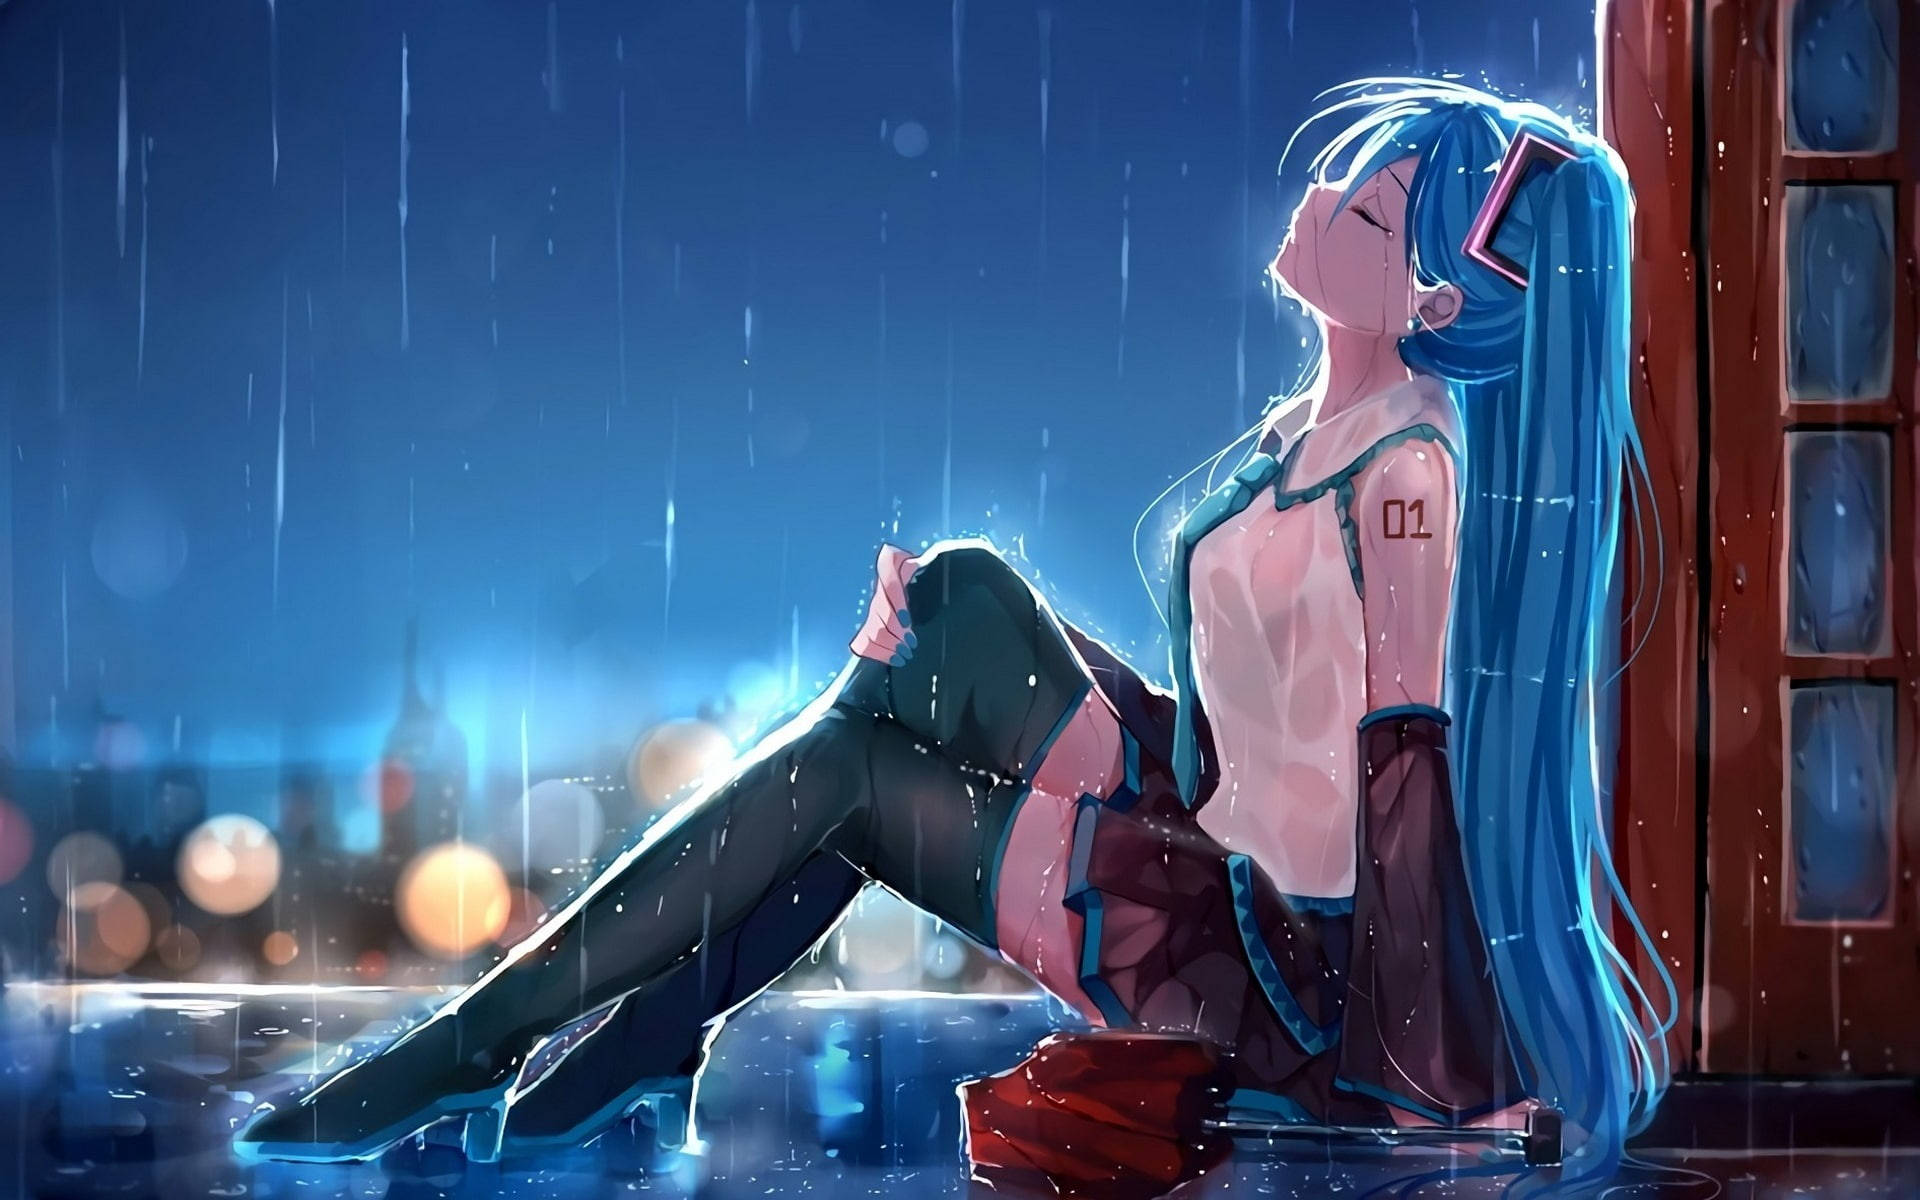 Anime Girl Showering In The Most Beautiful Rain Background